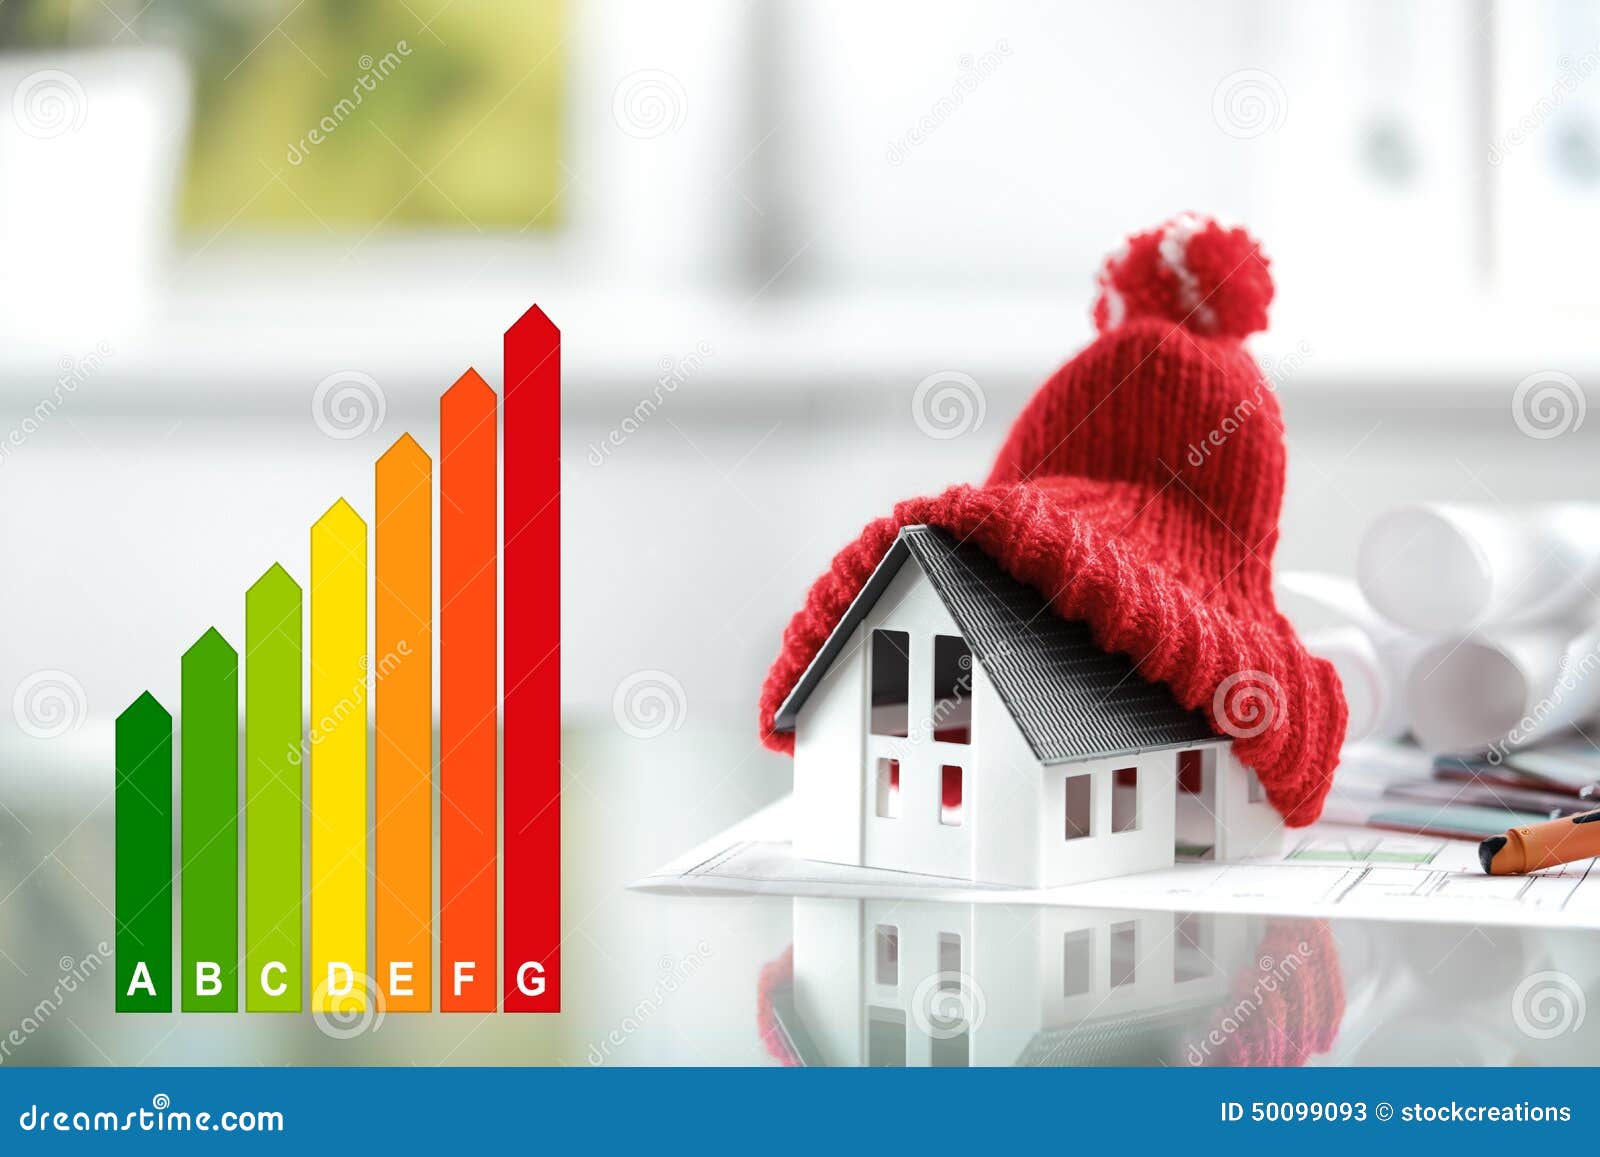 energy efficiency concept with energy rating chart